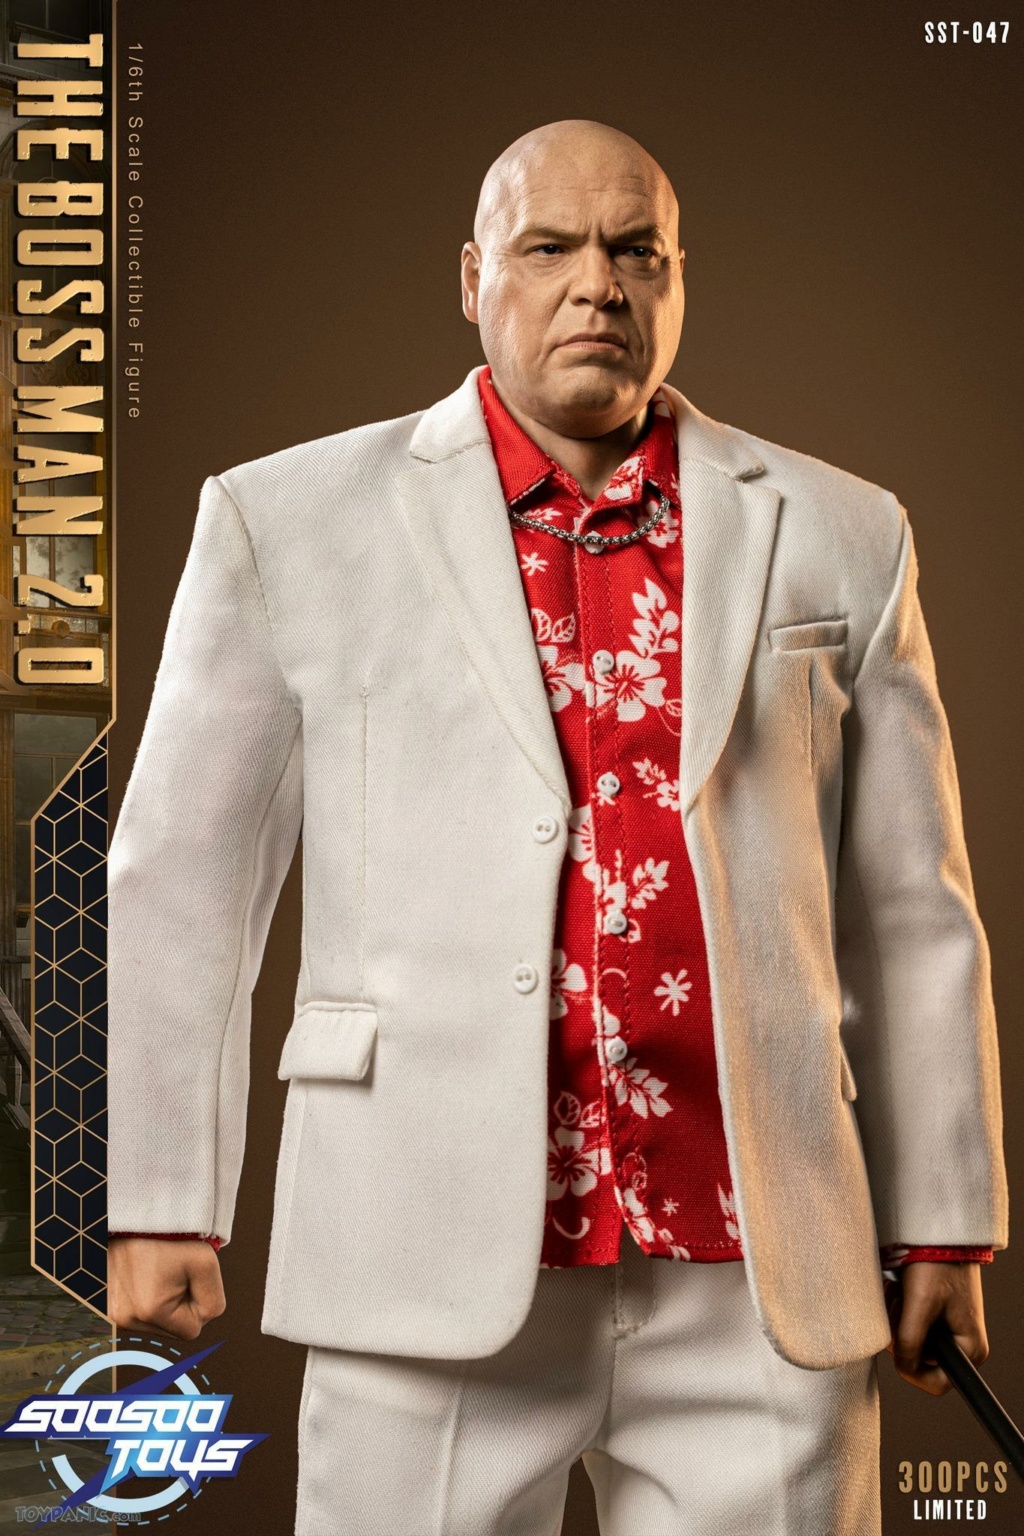 Soosootoys - NEW PRODUCT: SooSooToys: 1/6 The Boss-Man 2.0 action figure 29520226